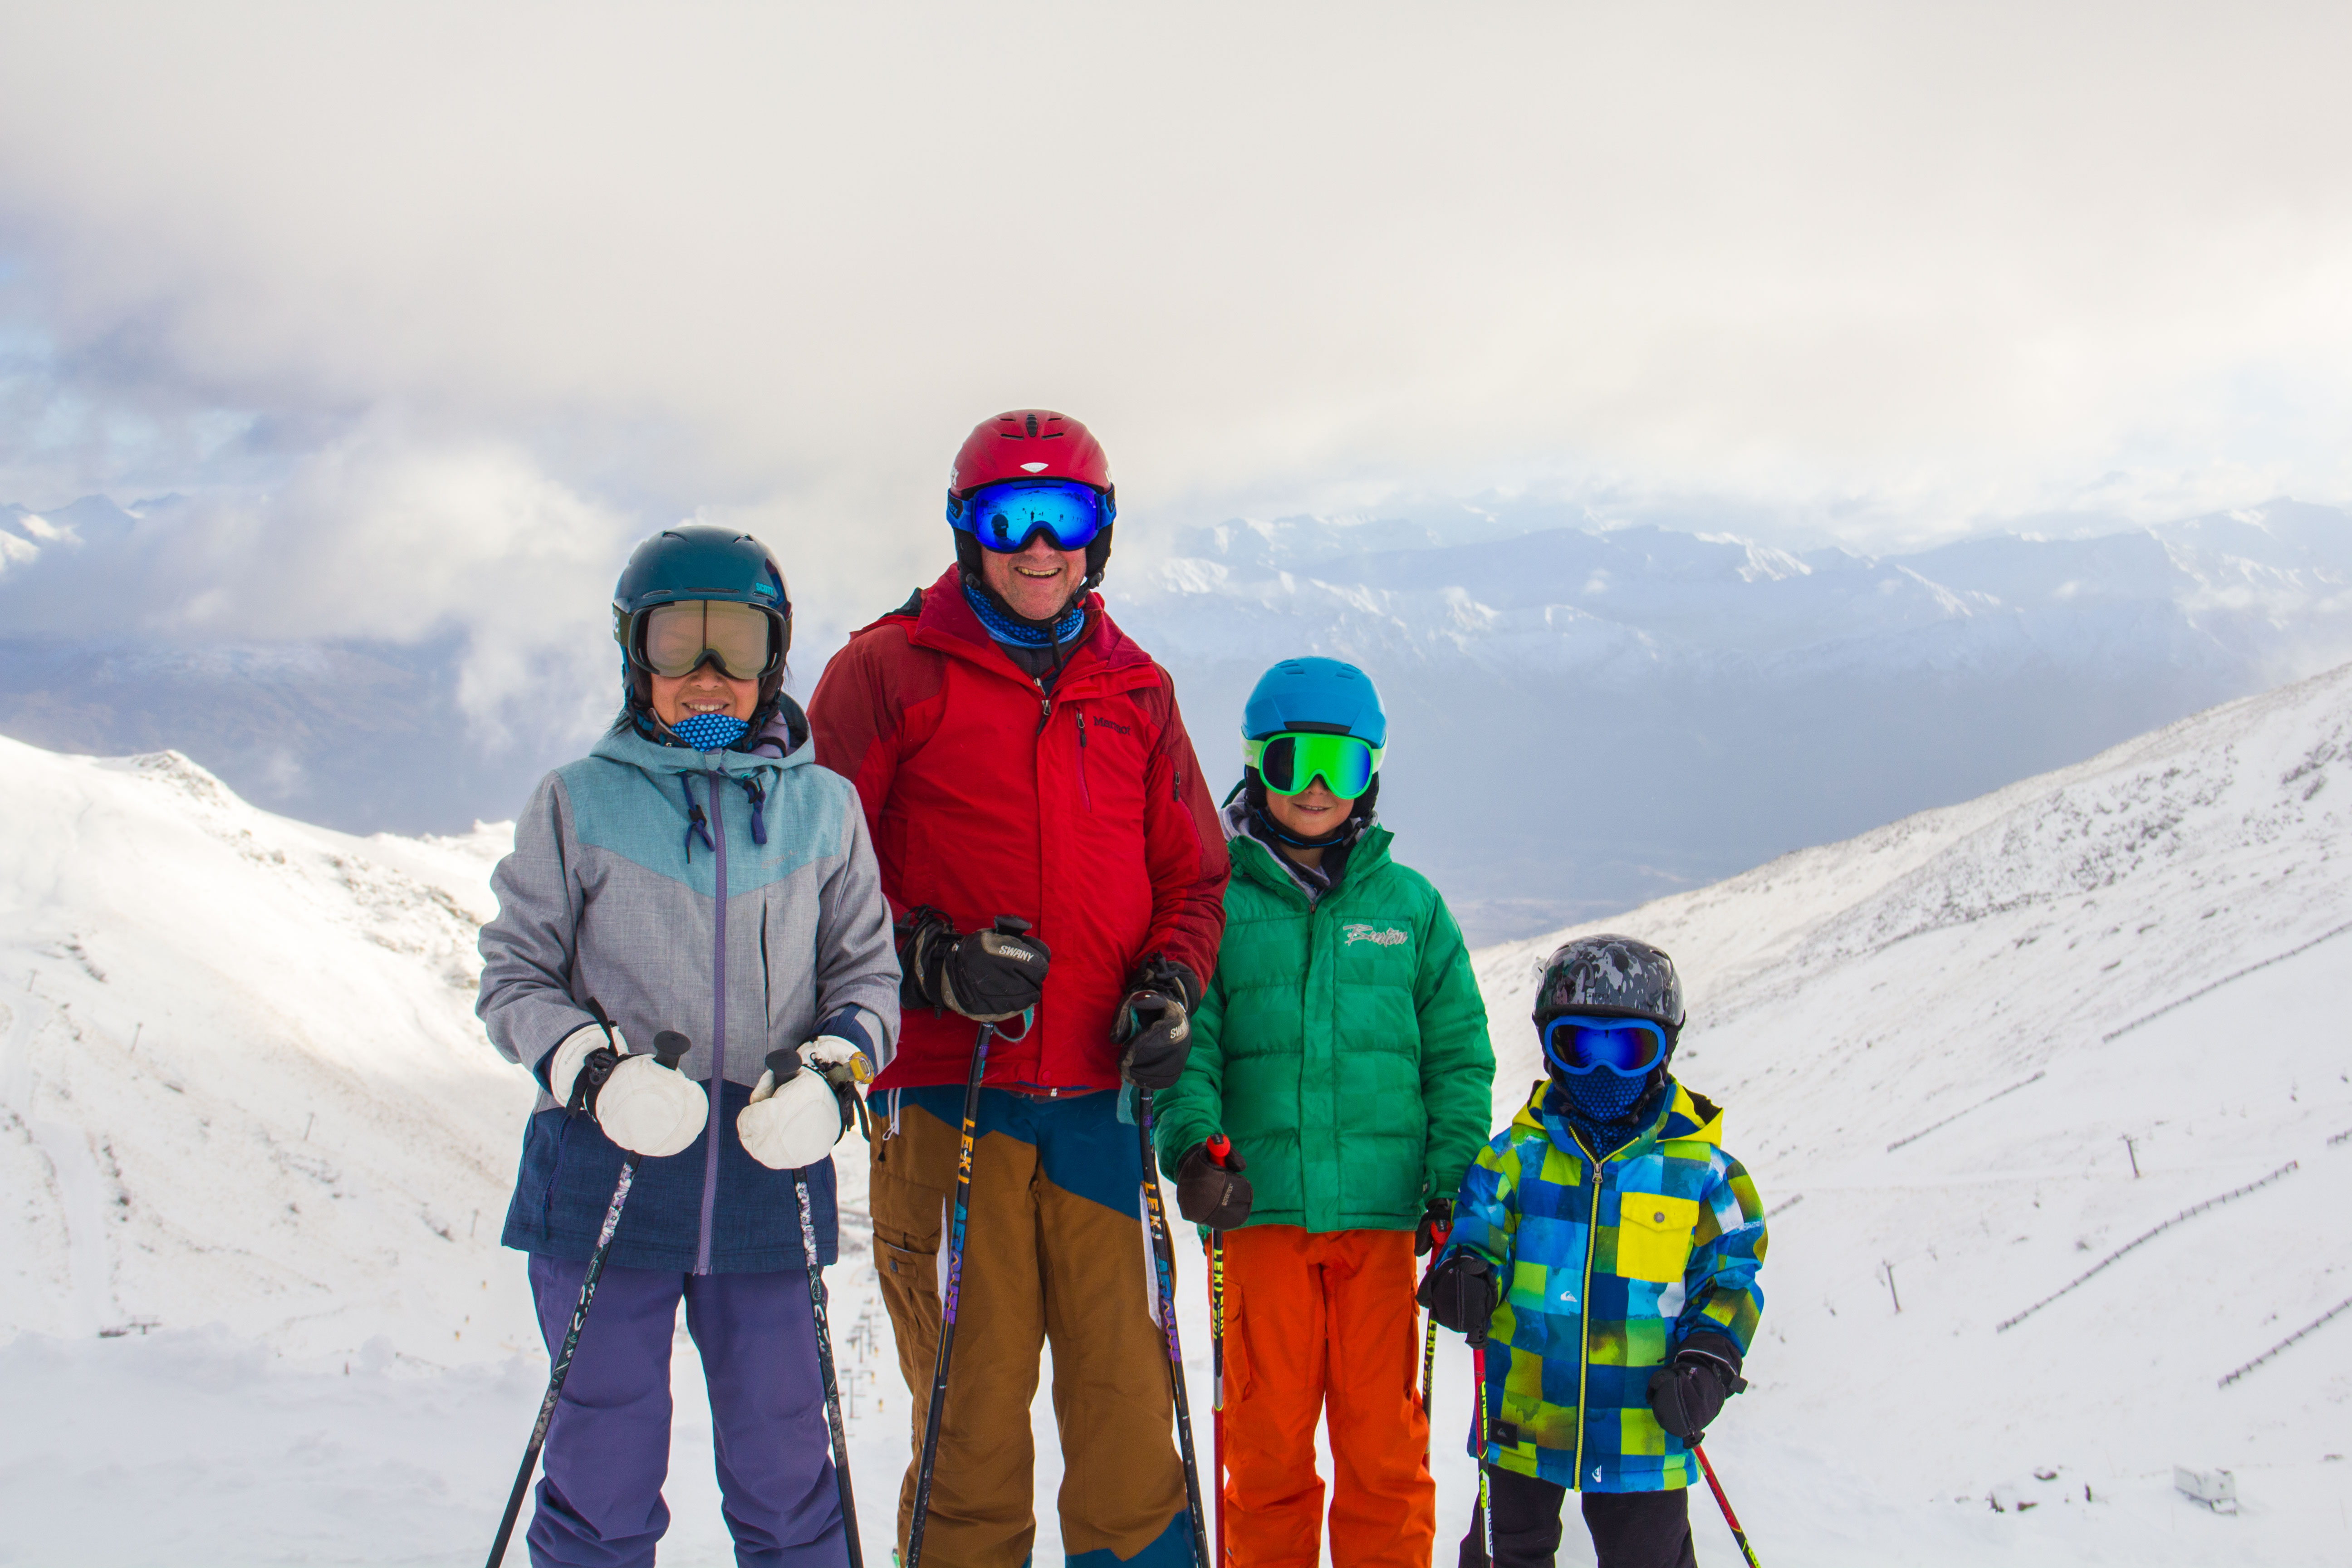 The Remarkables opens with expanded learners’ terrain and upgrades to enhance guest experience